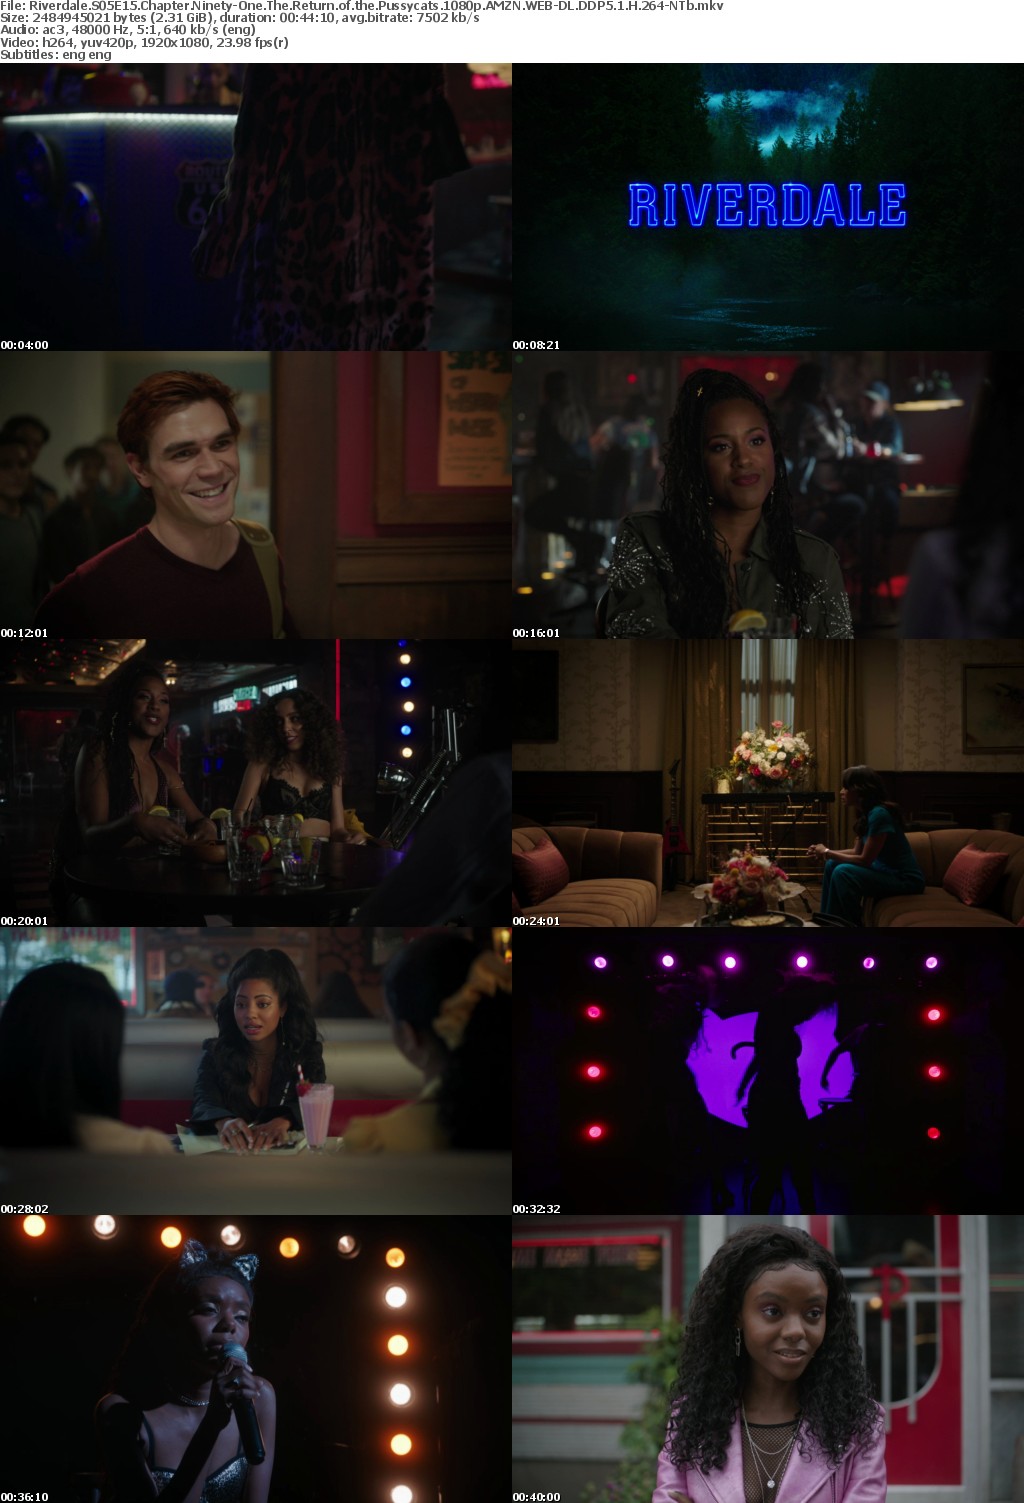 Riverdale US S05E15 Chapter Ninety-One The Return of the Pussycats 1080p AMZN WEBRip DDP5 1 x264-NTb